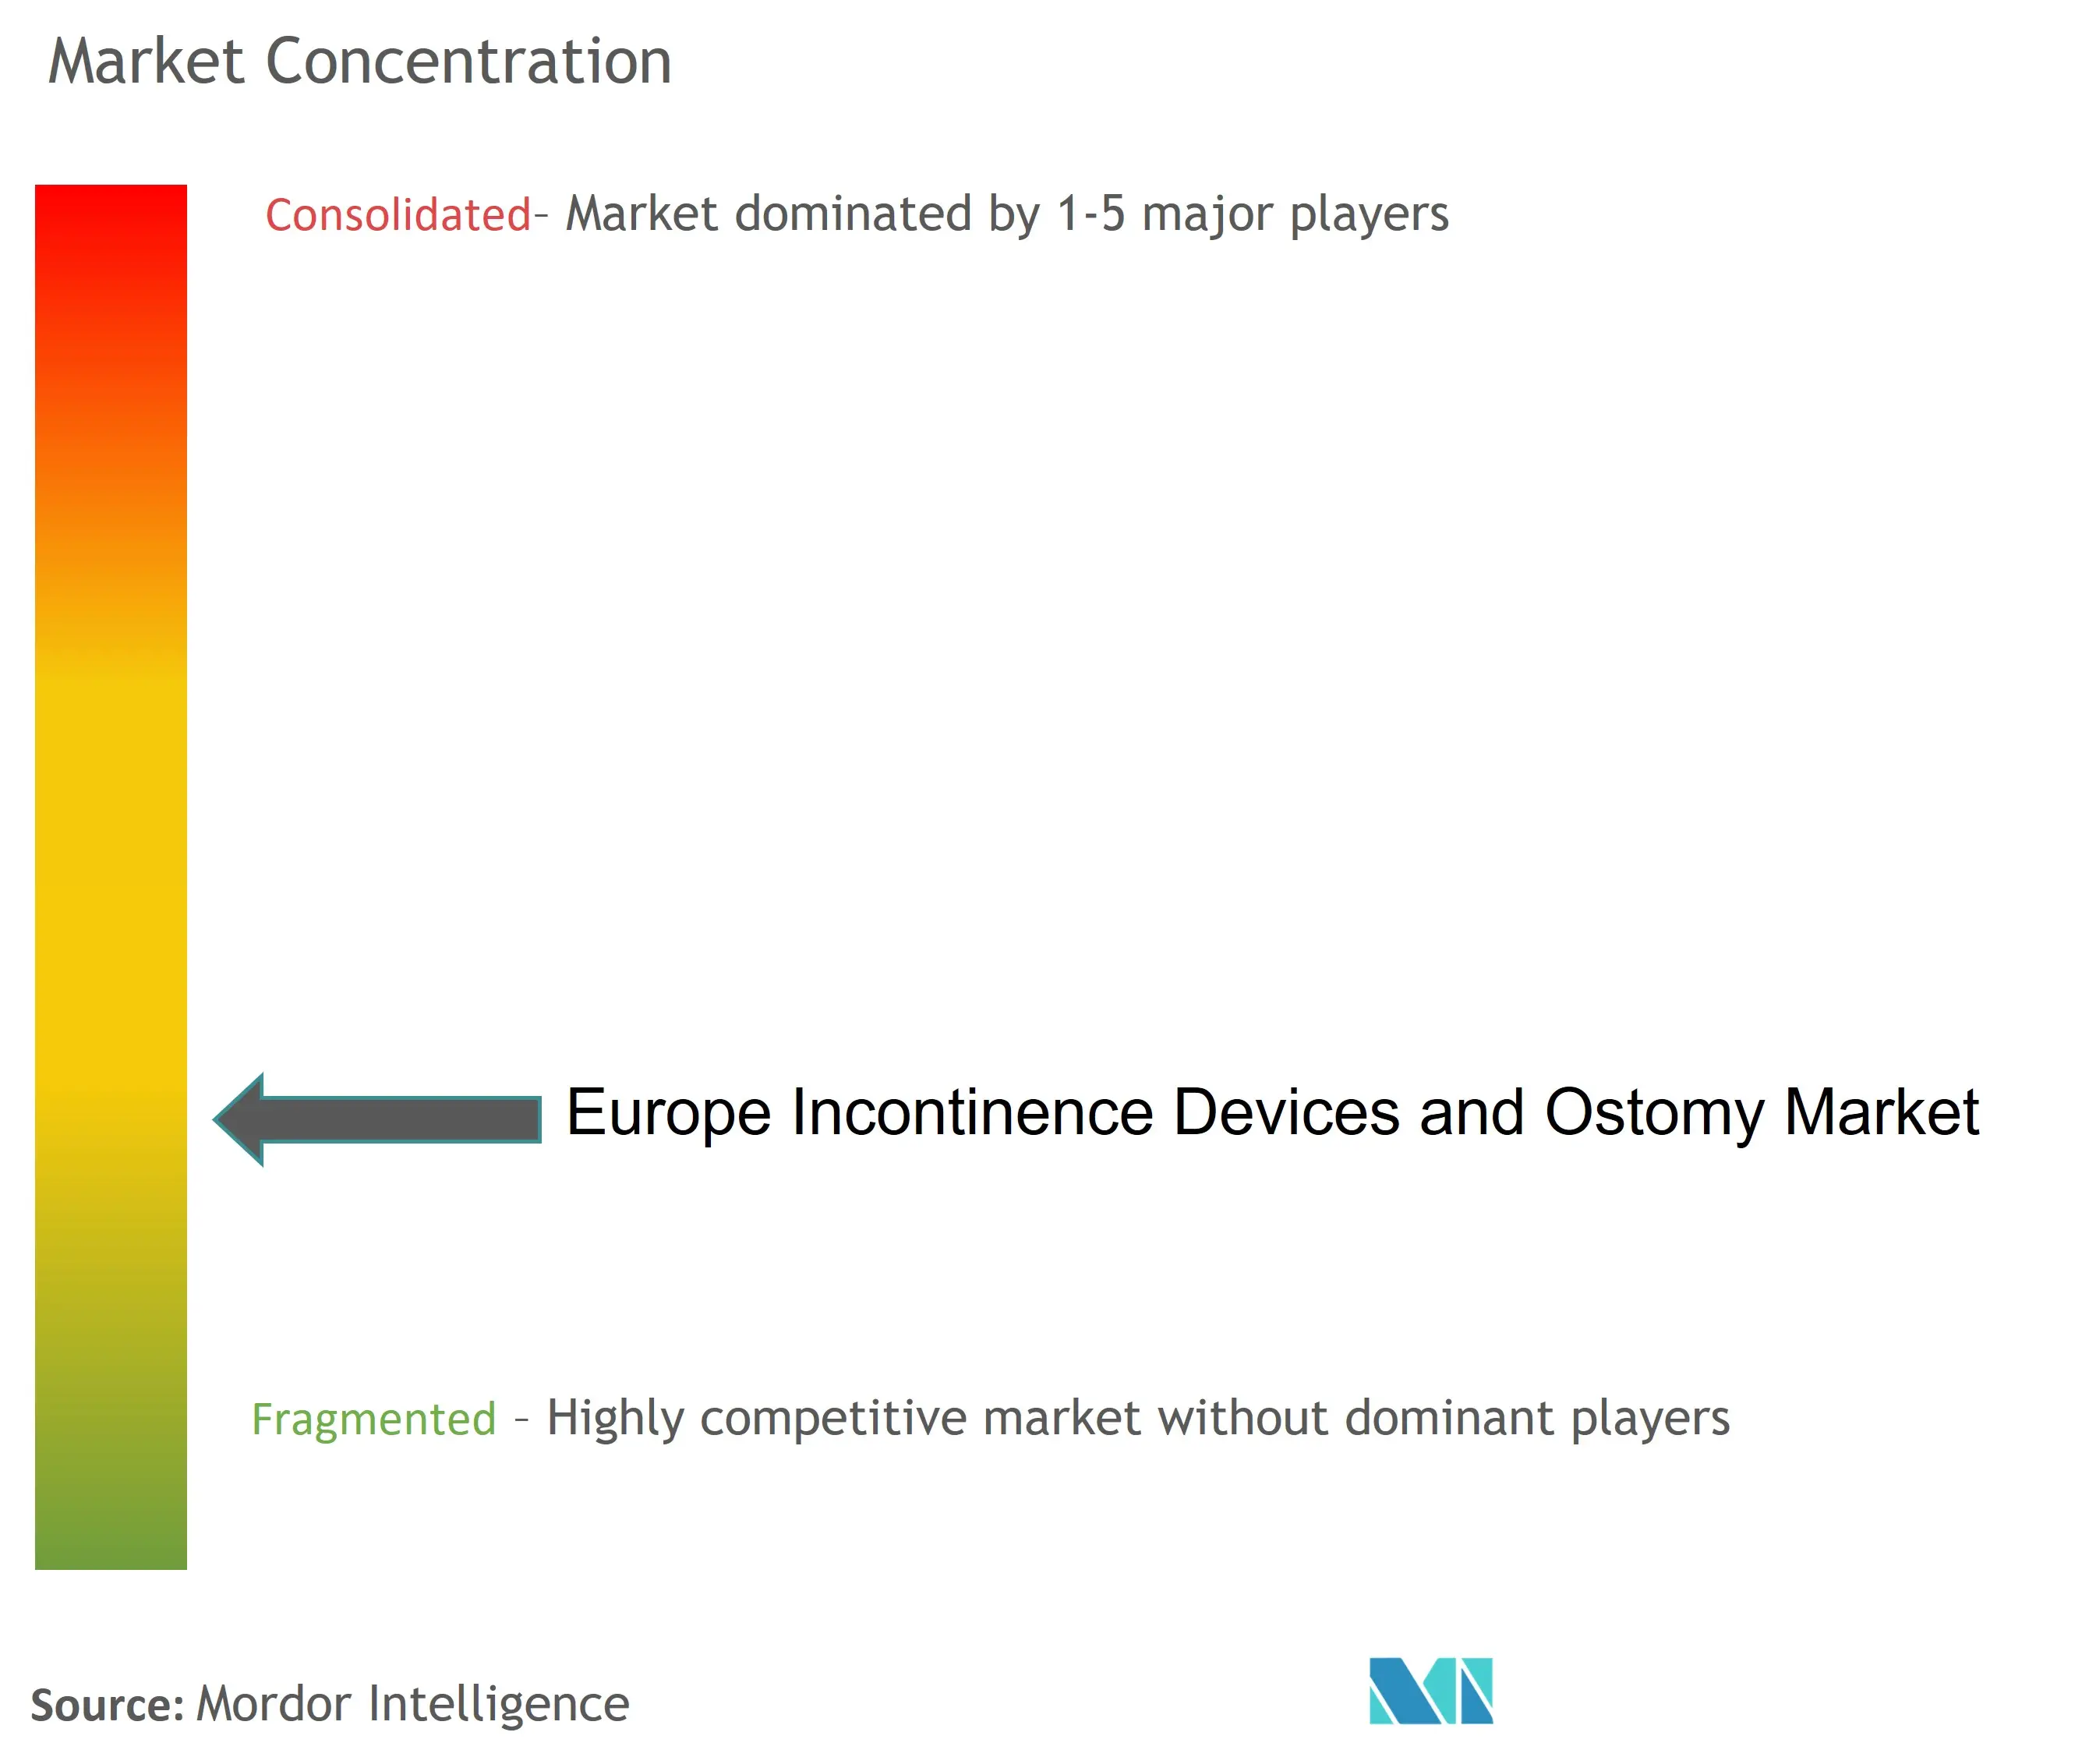 Europe Incontinence Devices and Ostomy Market Concentration